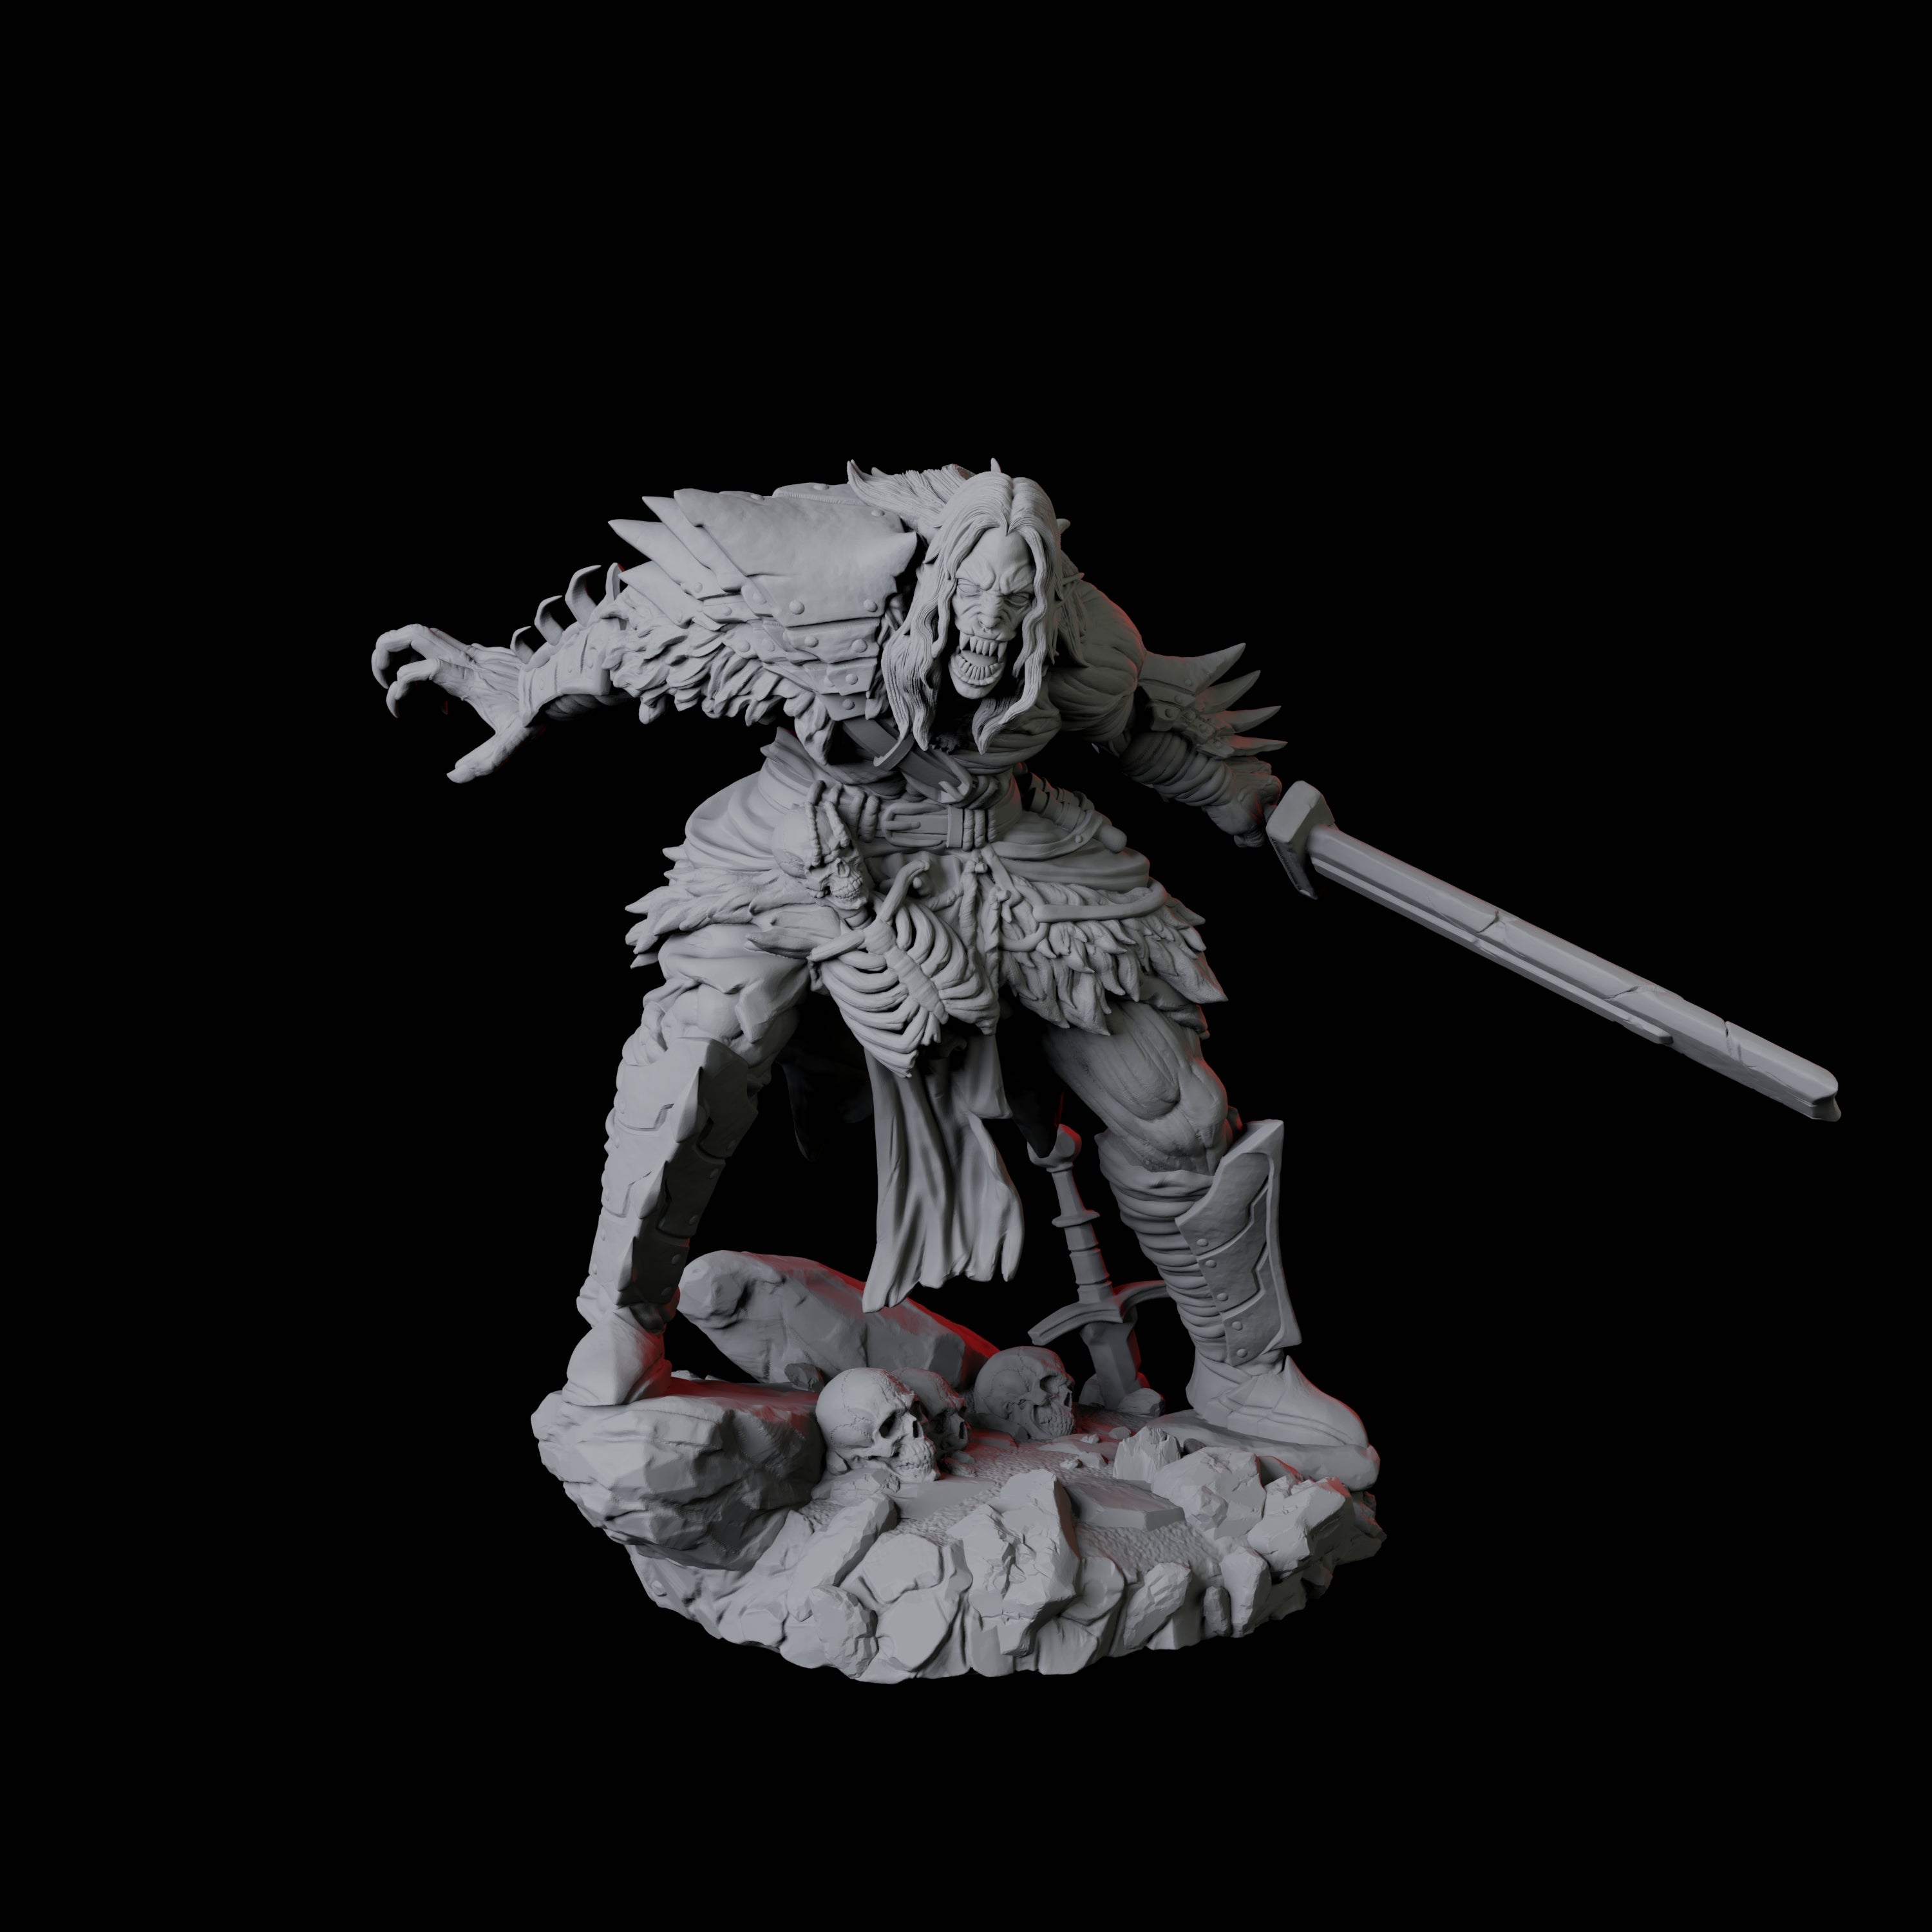 Four Stalking Urdefhan Warriors Miniature for Dungeons and Dragons, Pathfinder or other TTRPGs